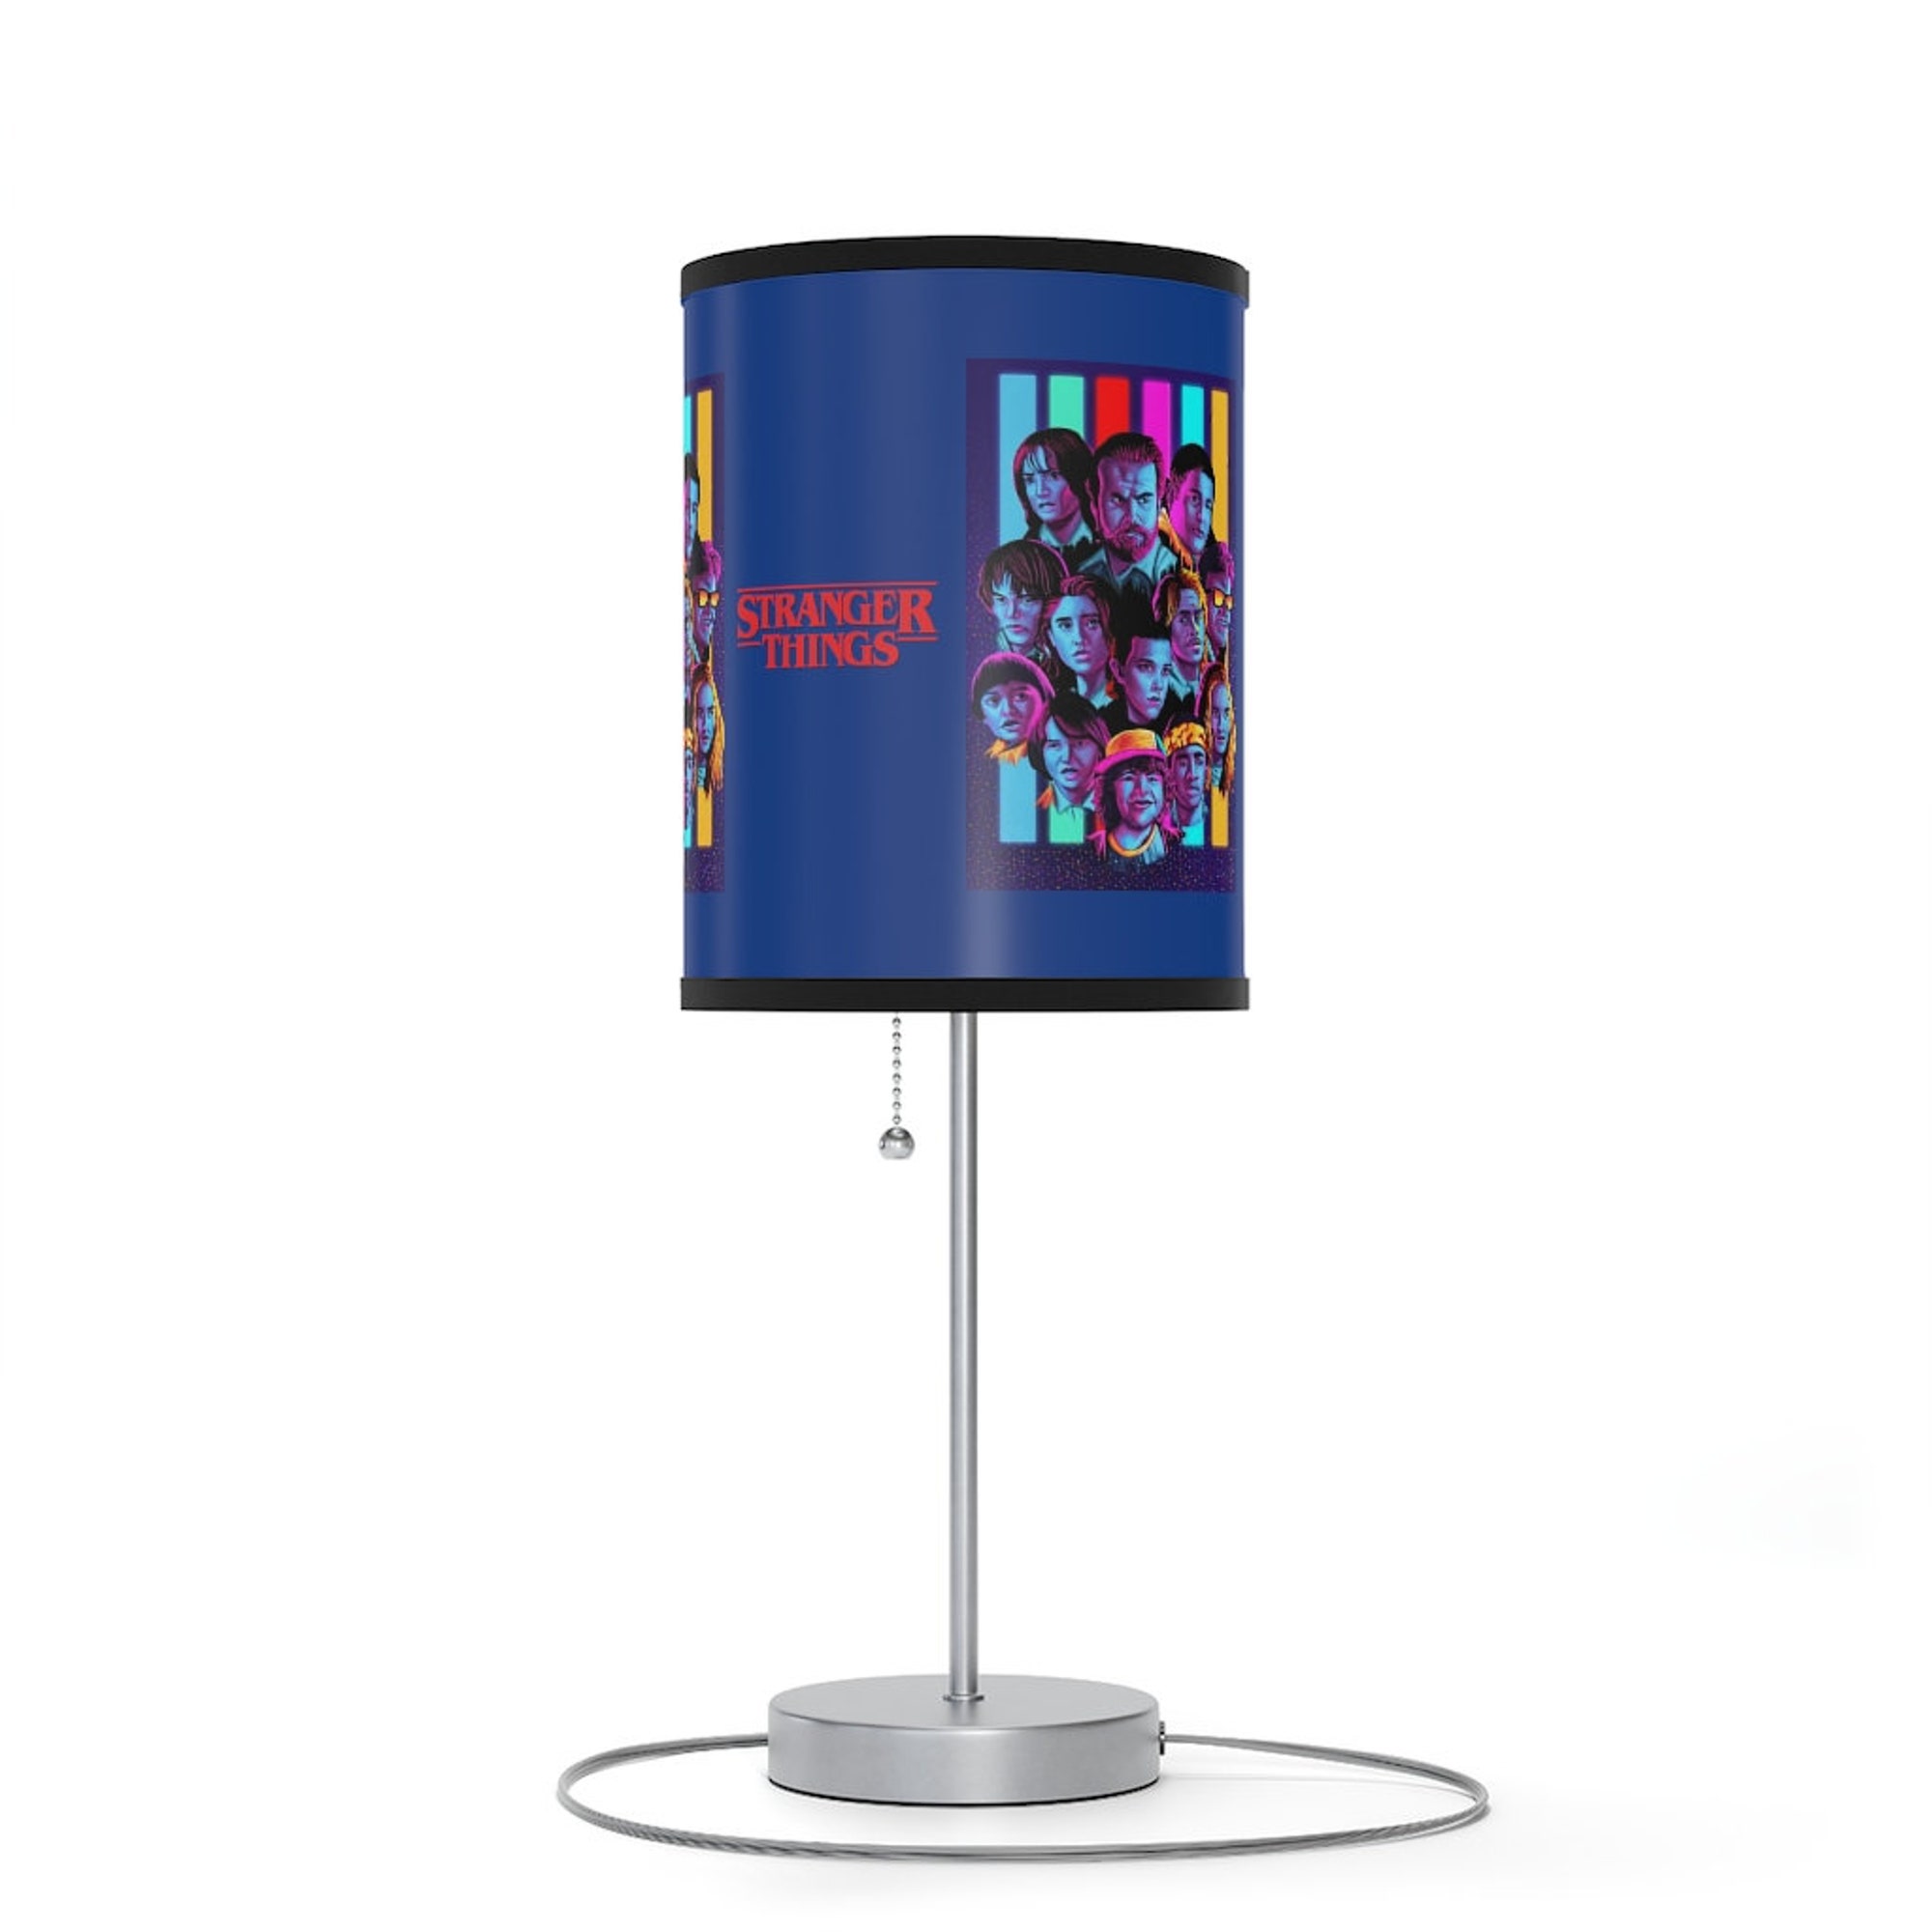 STRANGER THINGS - Lamp on Stand, All Cast, Poster Painted Style Art, Desk Lamp